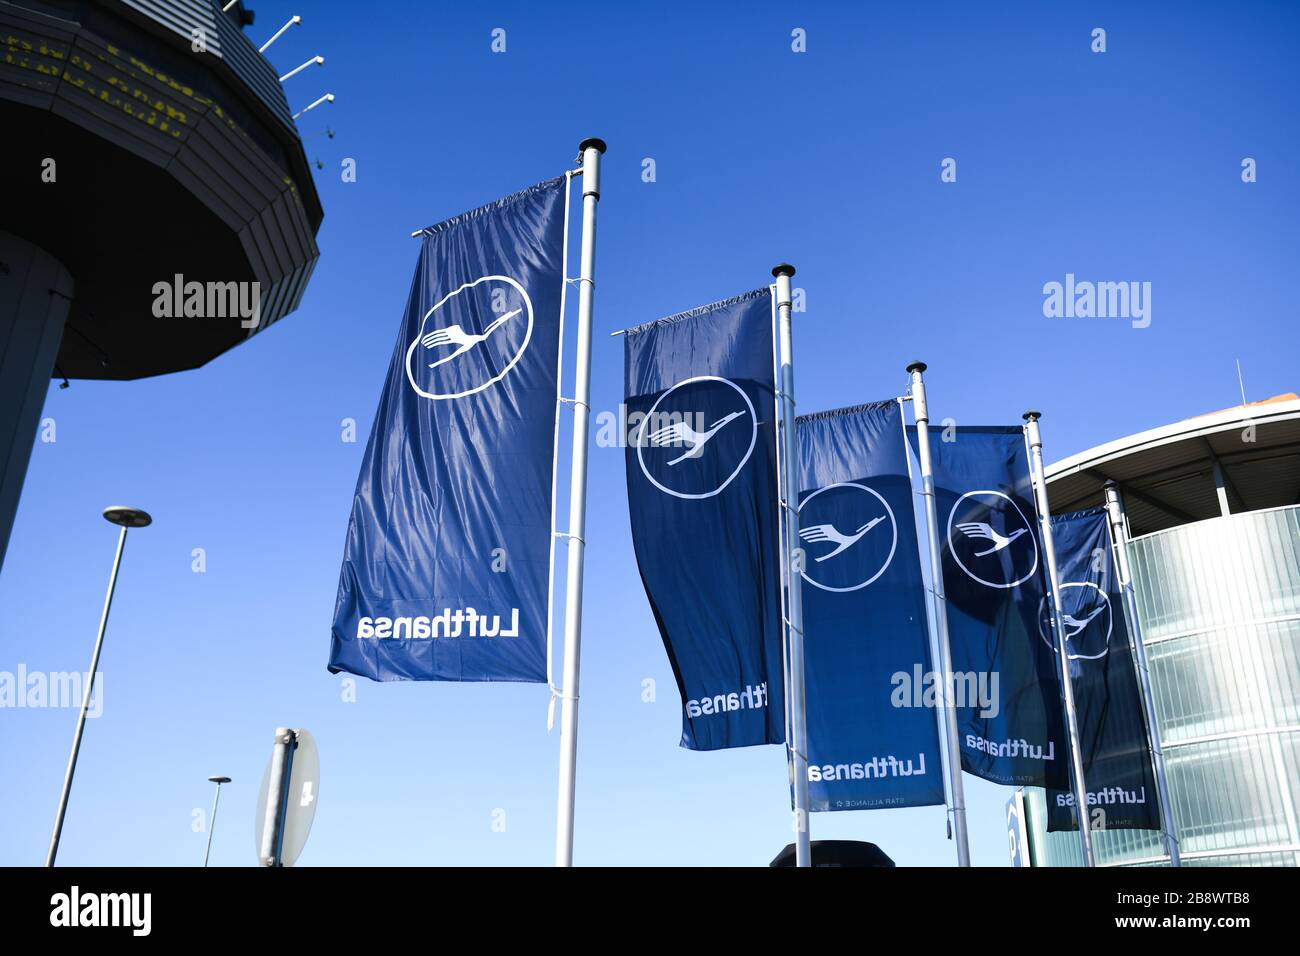 Flags of Lufthansa in front of Hanover Airport Flags of Lufthansa at Hanover Airport GES/Daily life in Hanover during the corona crisis, 22.03.2020 GES/Daily life during the corona crisis in Hanover, Germany. 03/22/2020 | usage worldwide Stock Photo